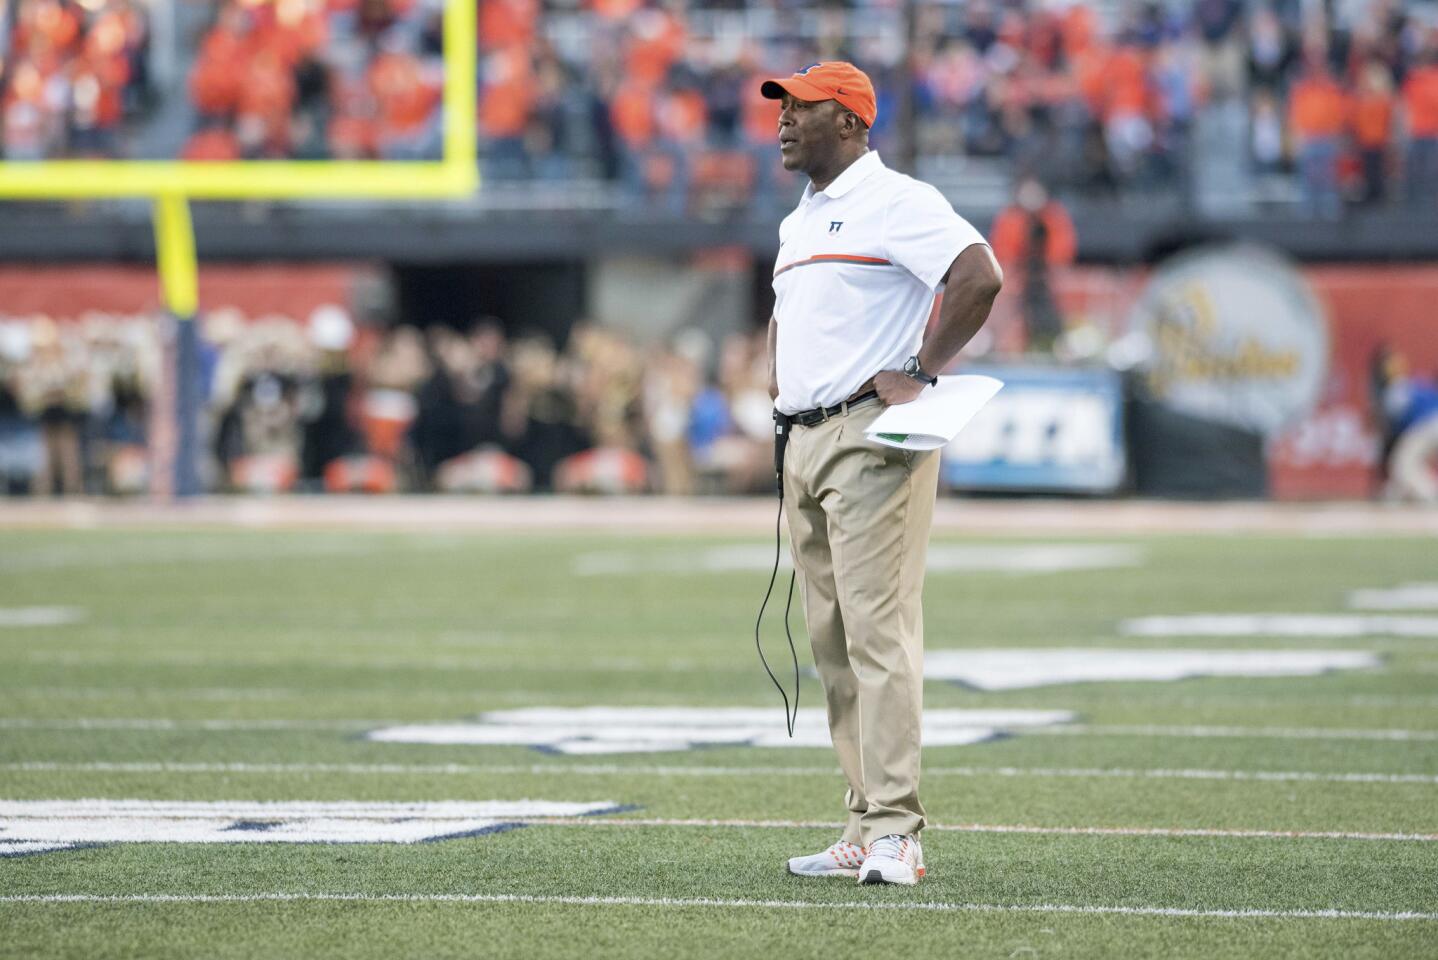 Lovie Smith stands on the field during a timeout during the second half against Purdue on Oct. 8, 2016. Purdue defeated Illinois 34-31 in overtime.